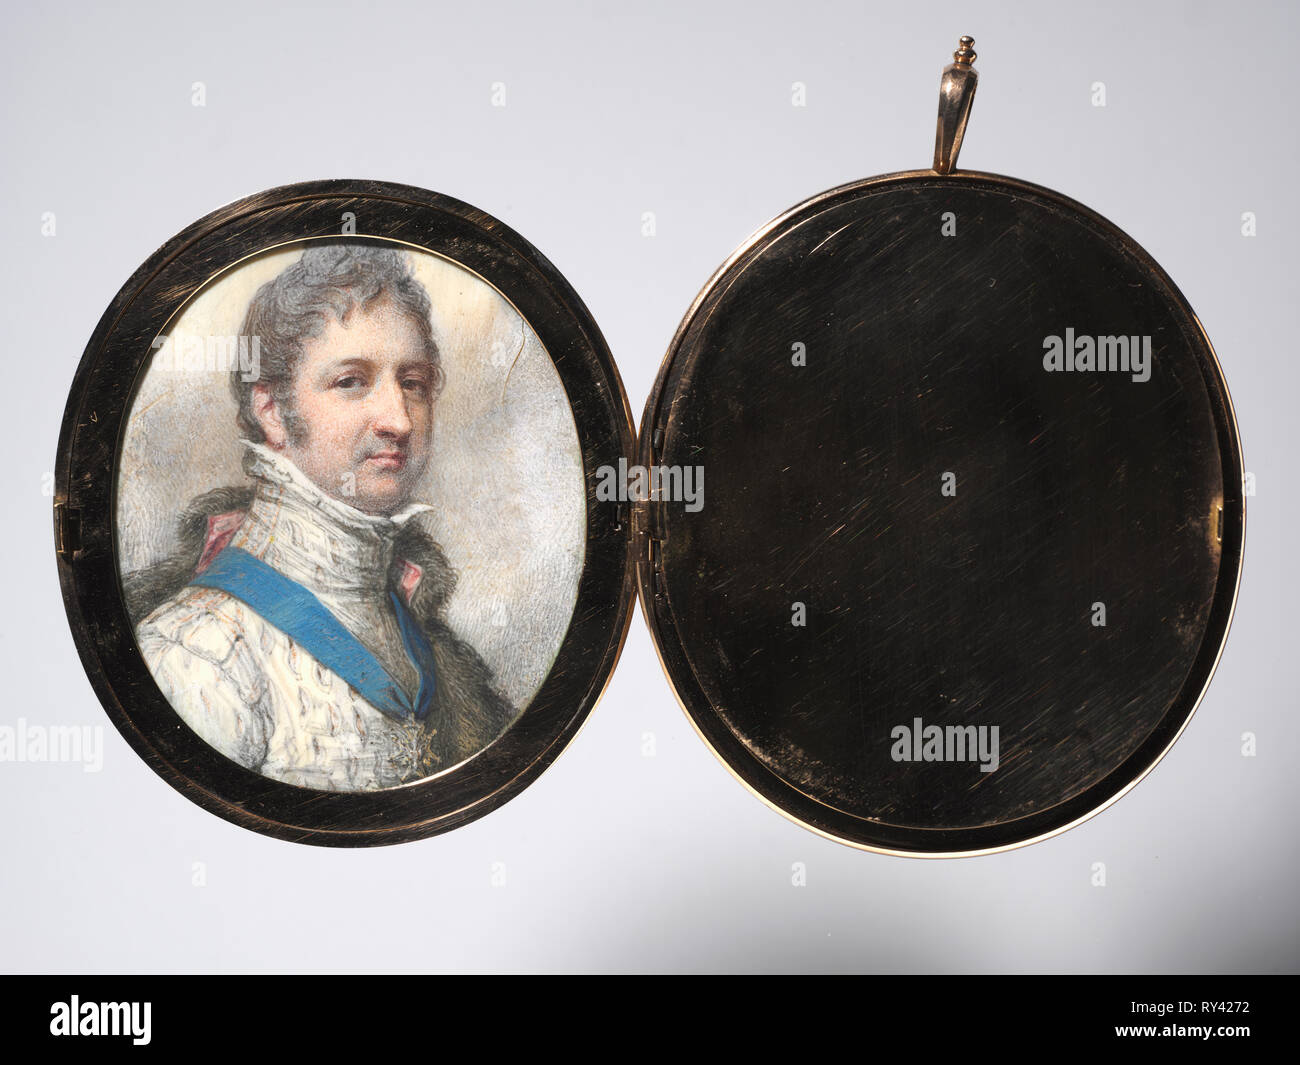 Portrait of Louis-Philippe, Duke of Orléans, later King of the French, 1804. Richard Cosway (British, 1742-1821). Watercolor on ivory in a gold locket frame; framed: 7.5 x 6.6 cm (2 15/16 x 2 5/8 in.); unframed: 6.3 x 5.4 cm (2 1/2 x 2 1/8 in Stock Photo